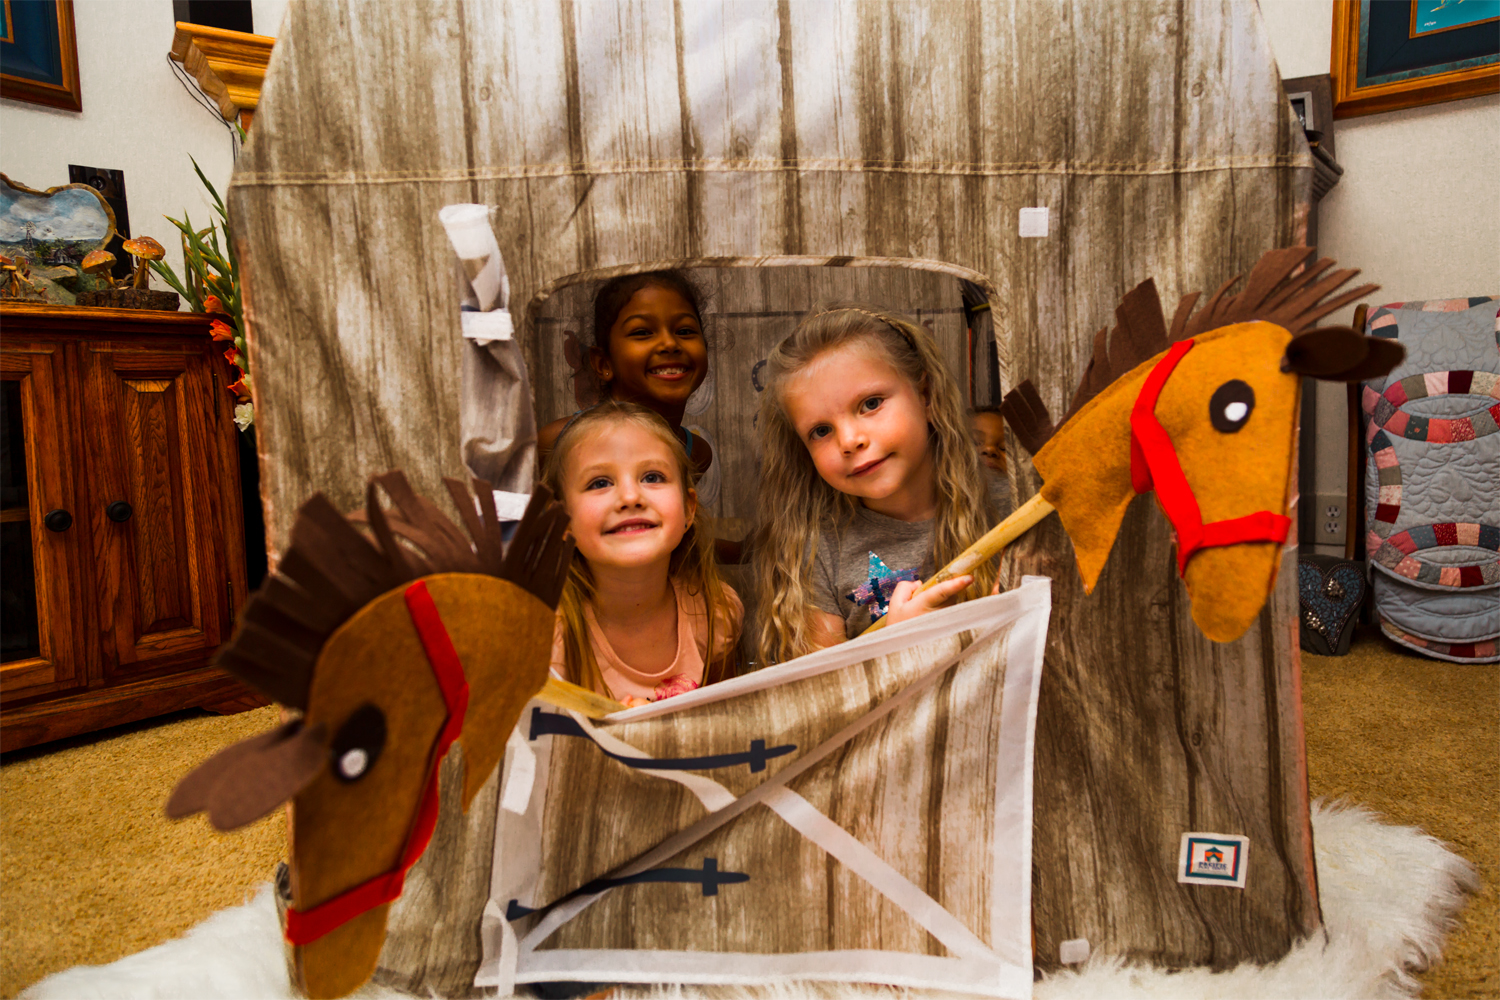 Time to horse around your play house with a DIY!